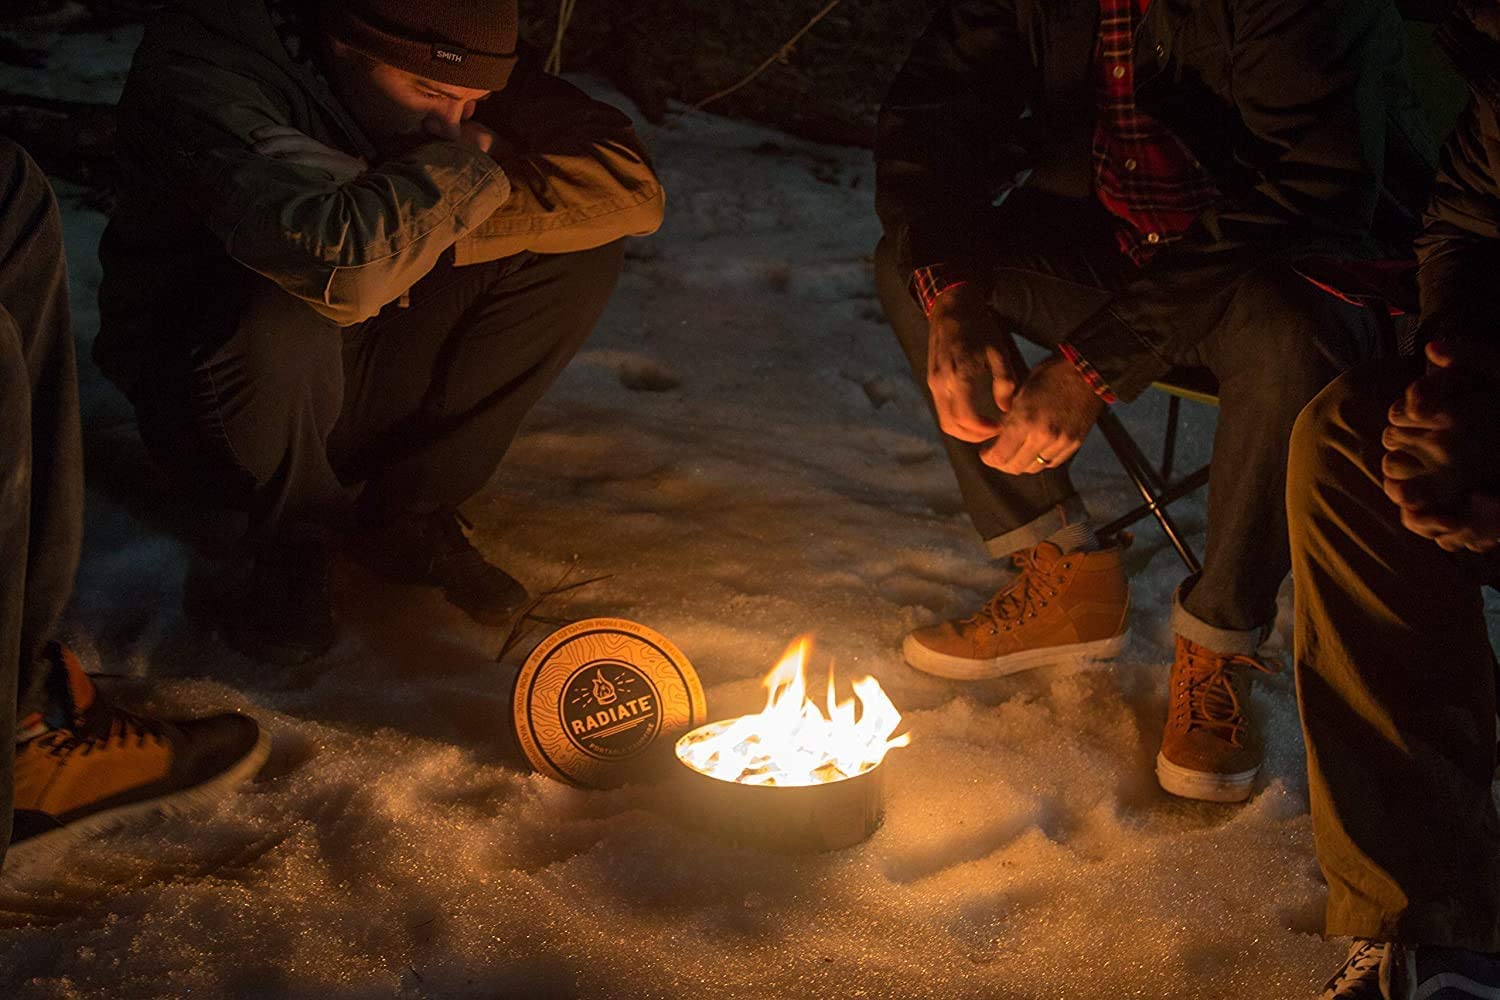 Radiate Portable Campfire: The Original Go-Anywhere Campfire | Lightweight and Portable | 3-5 Hours of Bright and Warm Burn Time | Convenient-No Embers-No Hassle | Made in USA | Original 1 Pack - image 5 of 7